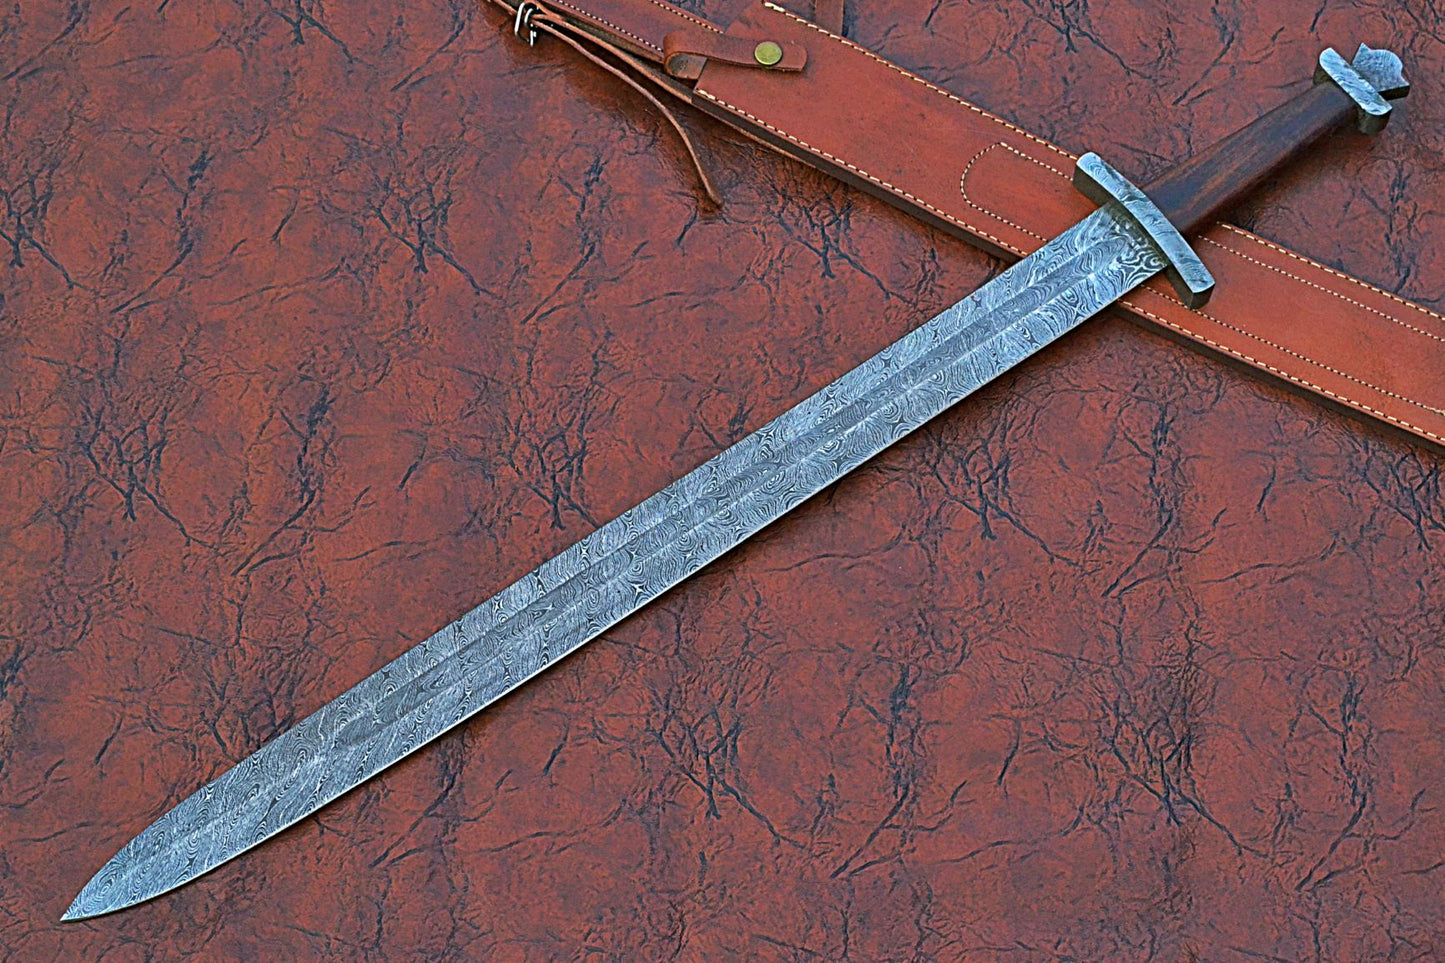 32 inches Long Jian Sword, 25" Long Hand Forged Damascus Steel Double Edge Blade, Solid Damascus Steel Cross hilt Forward and Crown Shape Pommel, Leather Scabbard with Shoulder Stripe